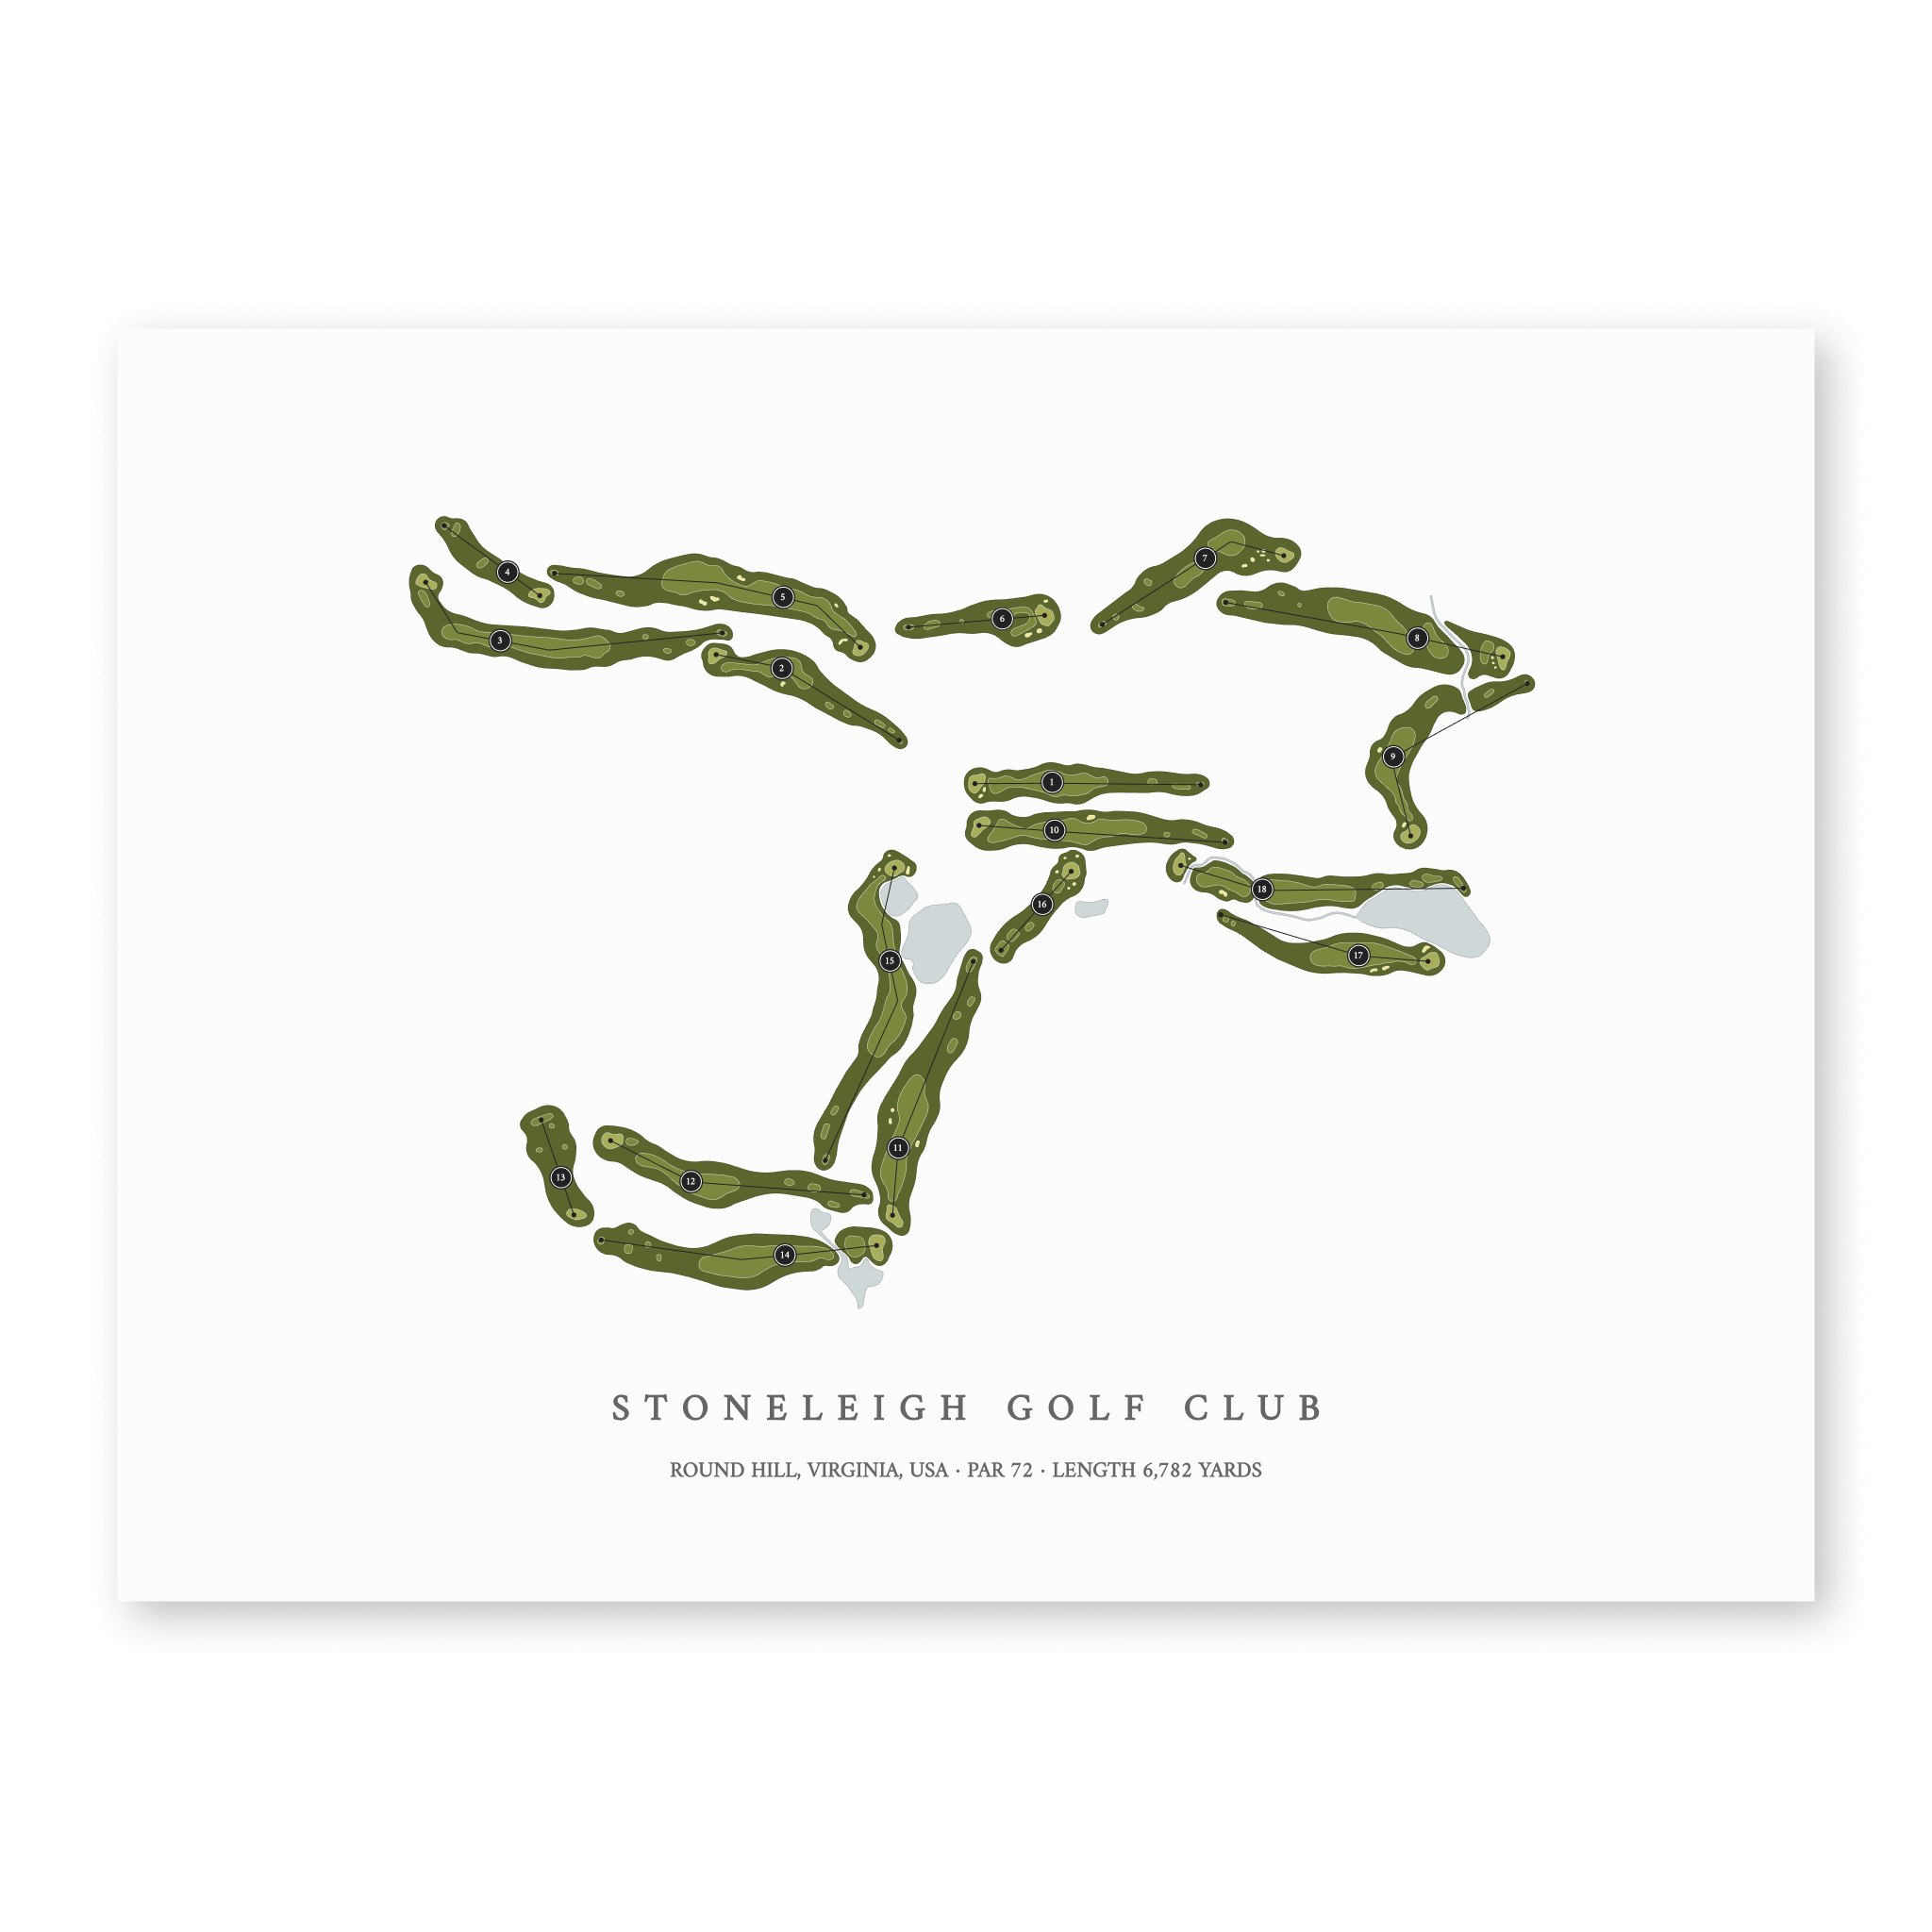 Stoneleigh Golf Club | Golf Course Map | Unframed With Hole Numbers #hole numbers_yes